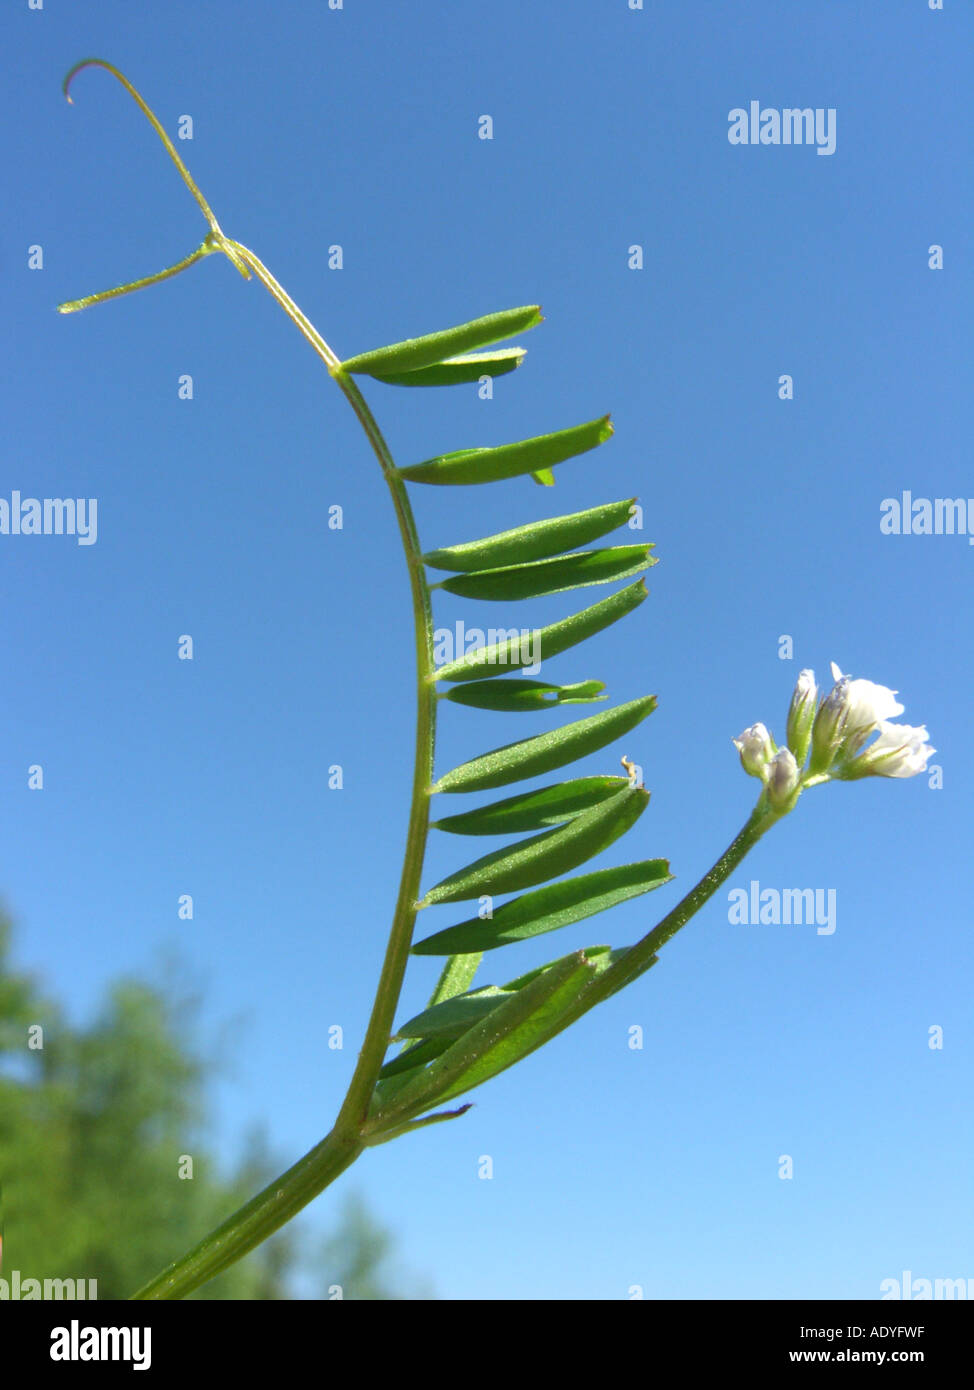 hairy tare, hairy vetch (Vicia hirsuta), inflorescence and leaf with tendril against blue sky Stock Photo